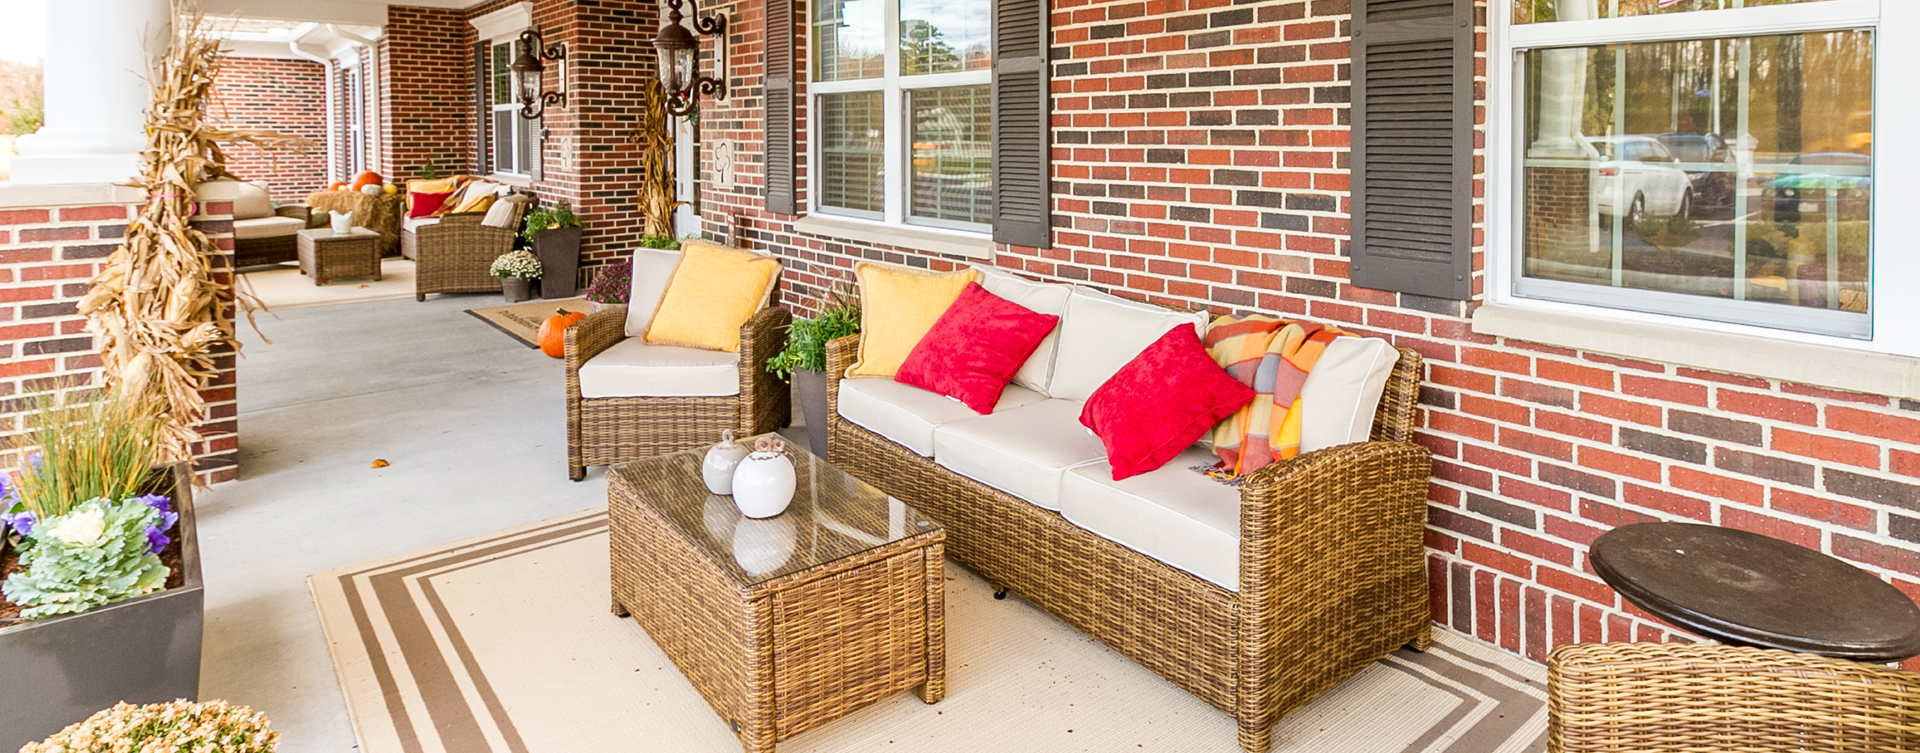 Enjoy conversations with friends on the porch at Bickford of Virginia Beach